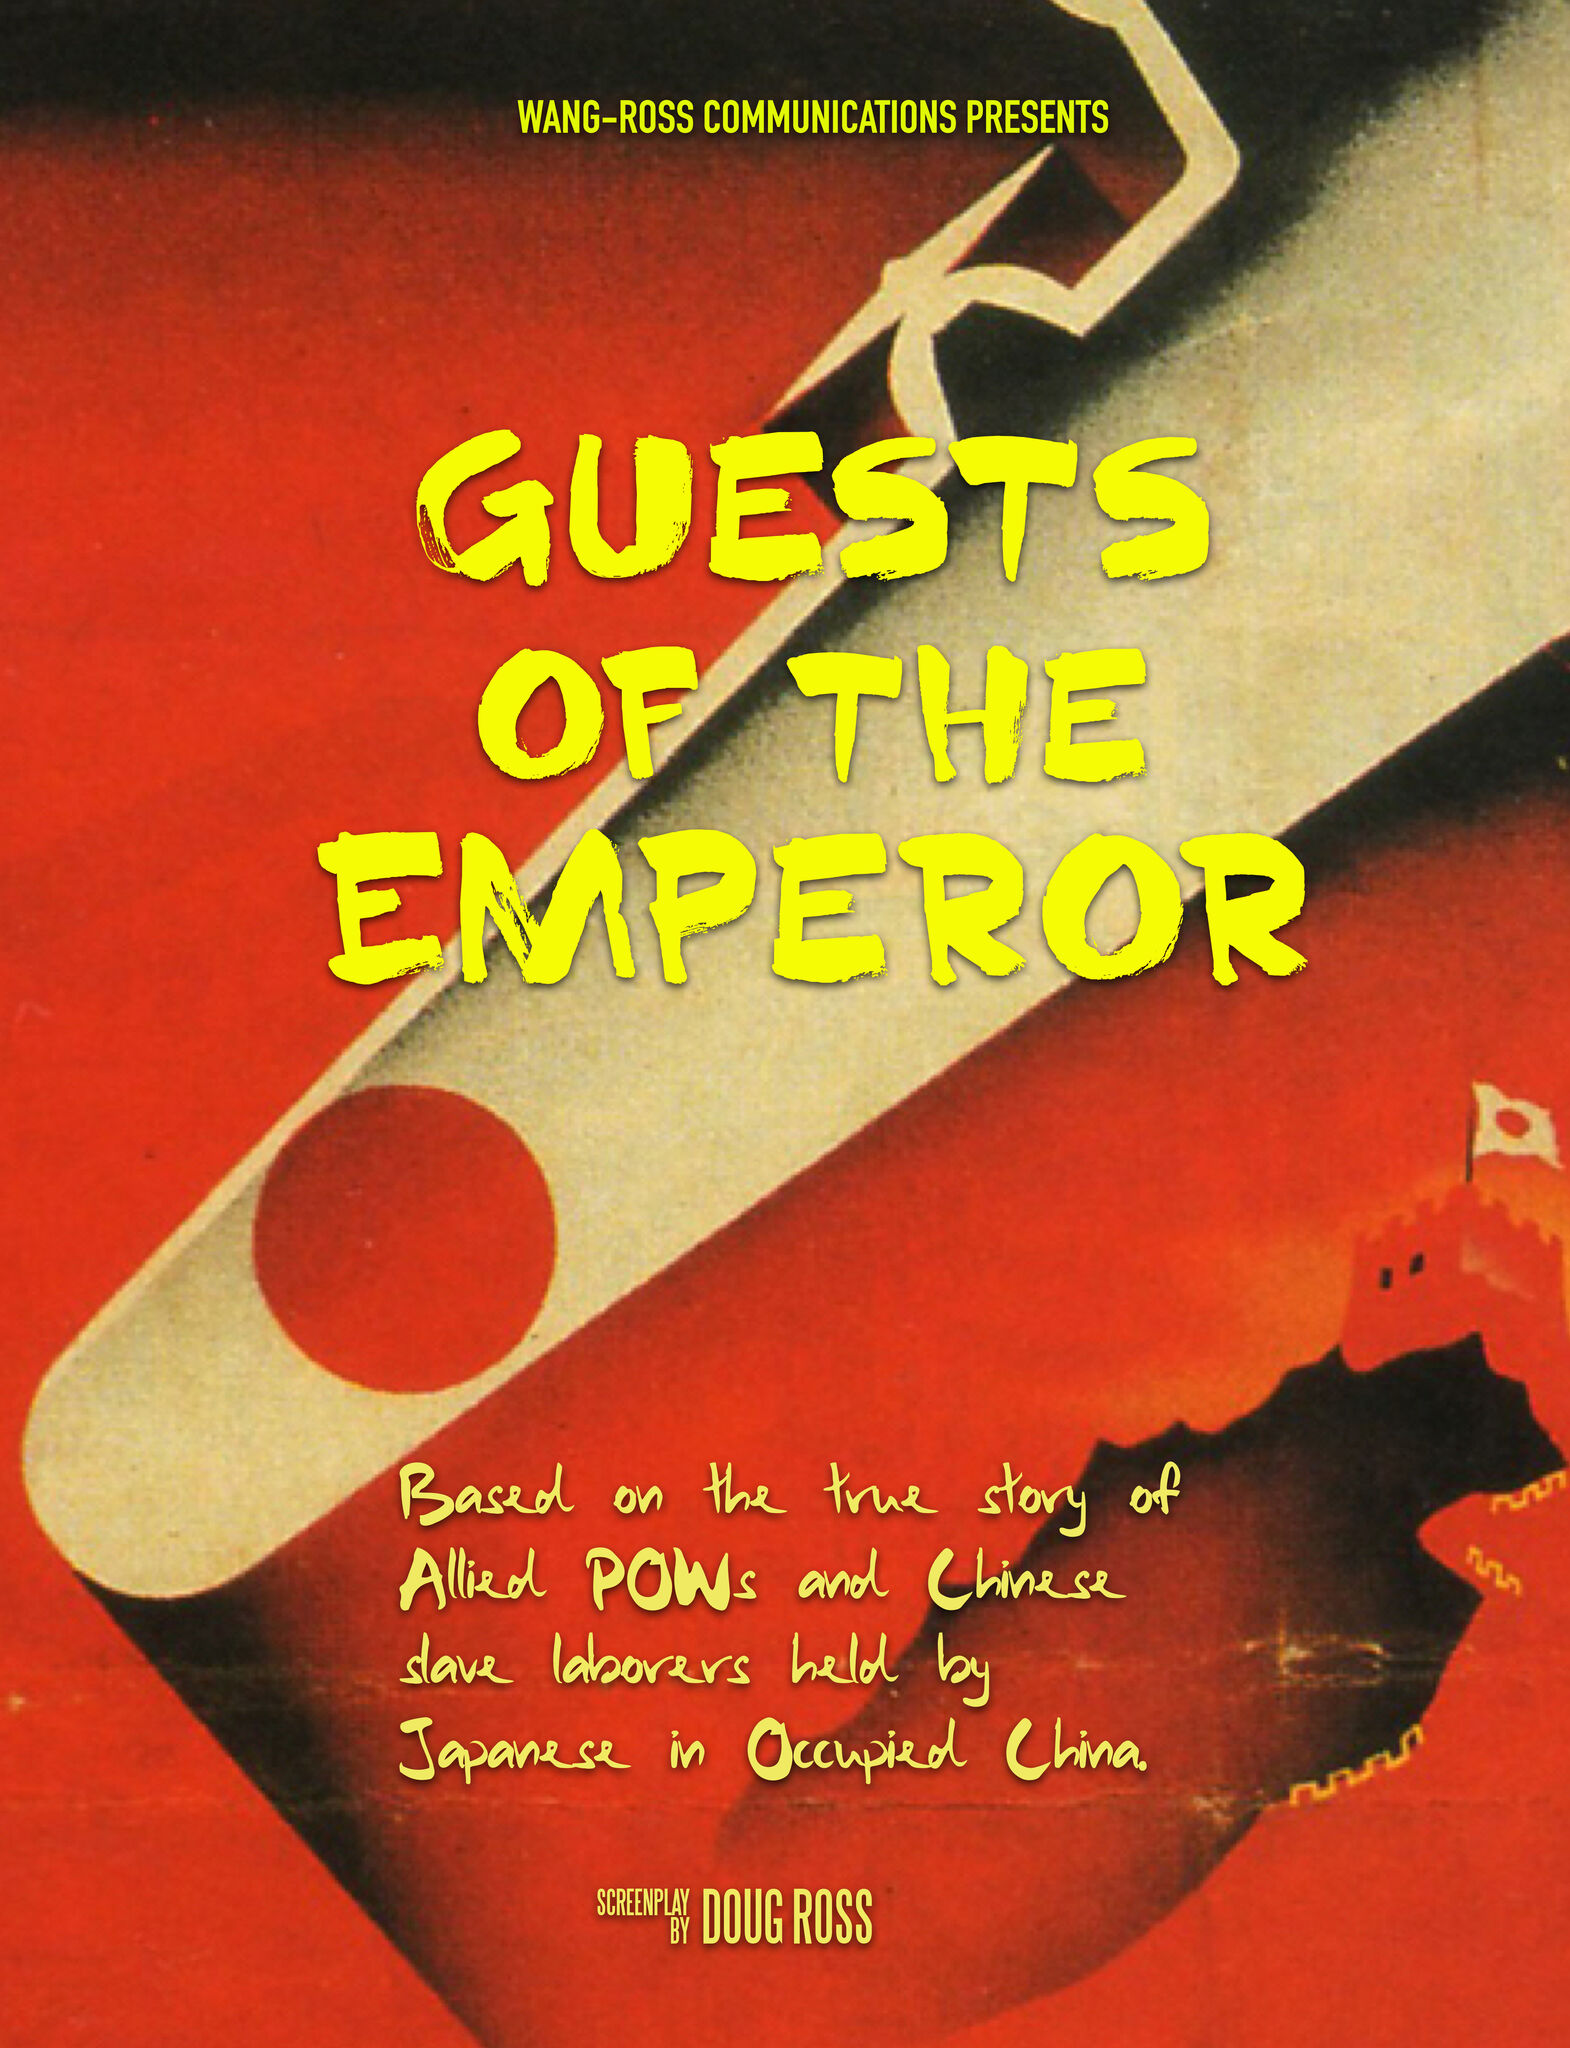 GUESTS OF THE EMPEROR